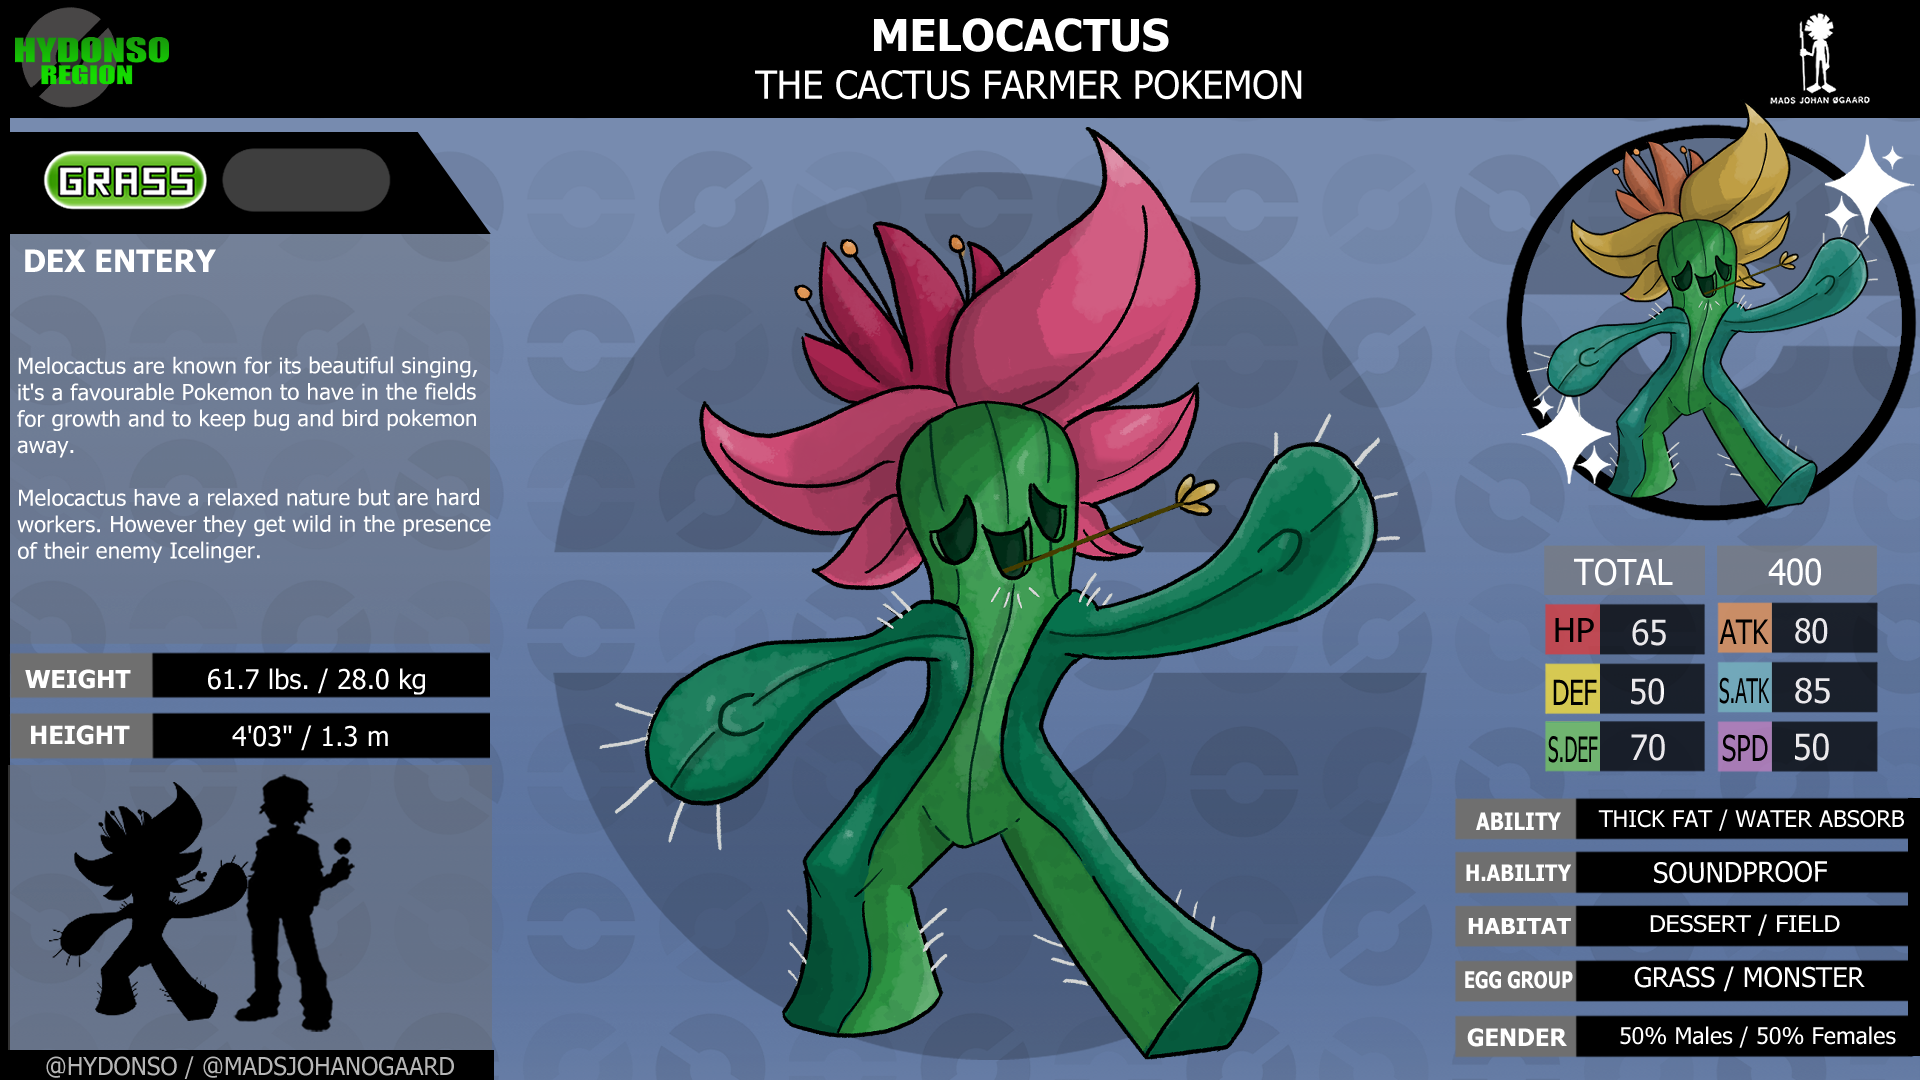 Fakemon - Metanik - #055 (#Brascadex) Name: Droeth Type: Grass/Ghost.  Ability: Natural cure/Overgrow. Species: Strange plant. Height: 1,20  Weight: 25kg Evolution: Degrast (Unevolved). Description : Pokemon  carnivorous plant, are gluttons Pokemons live